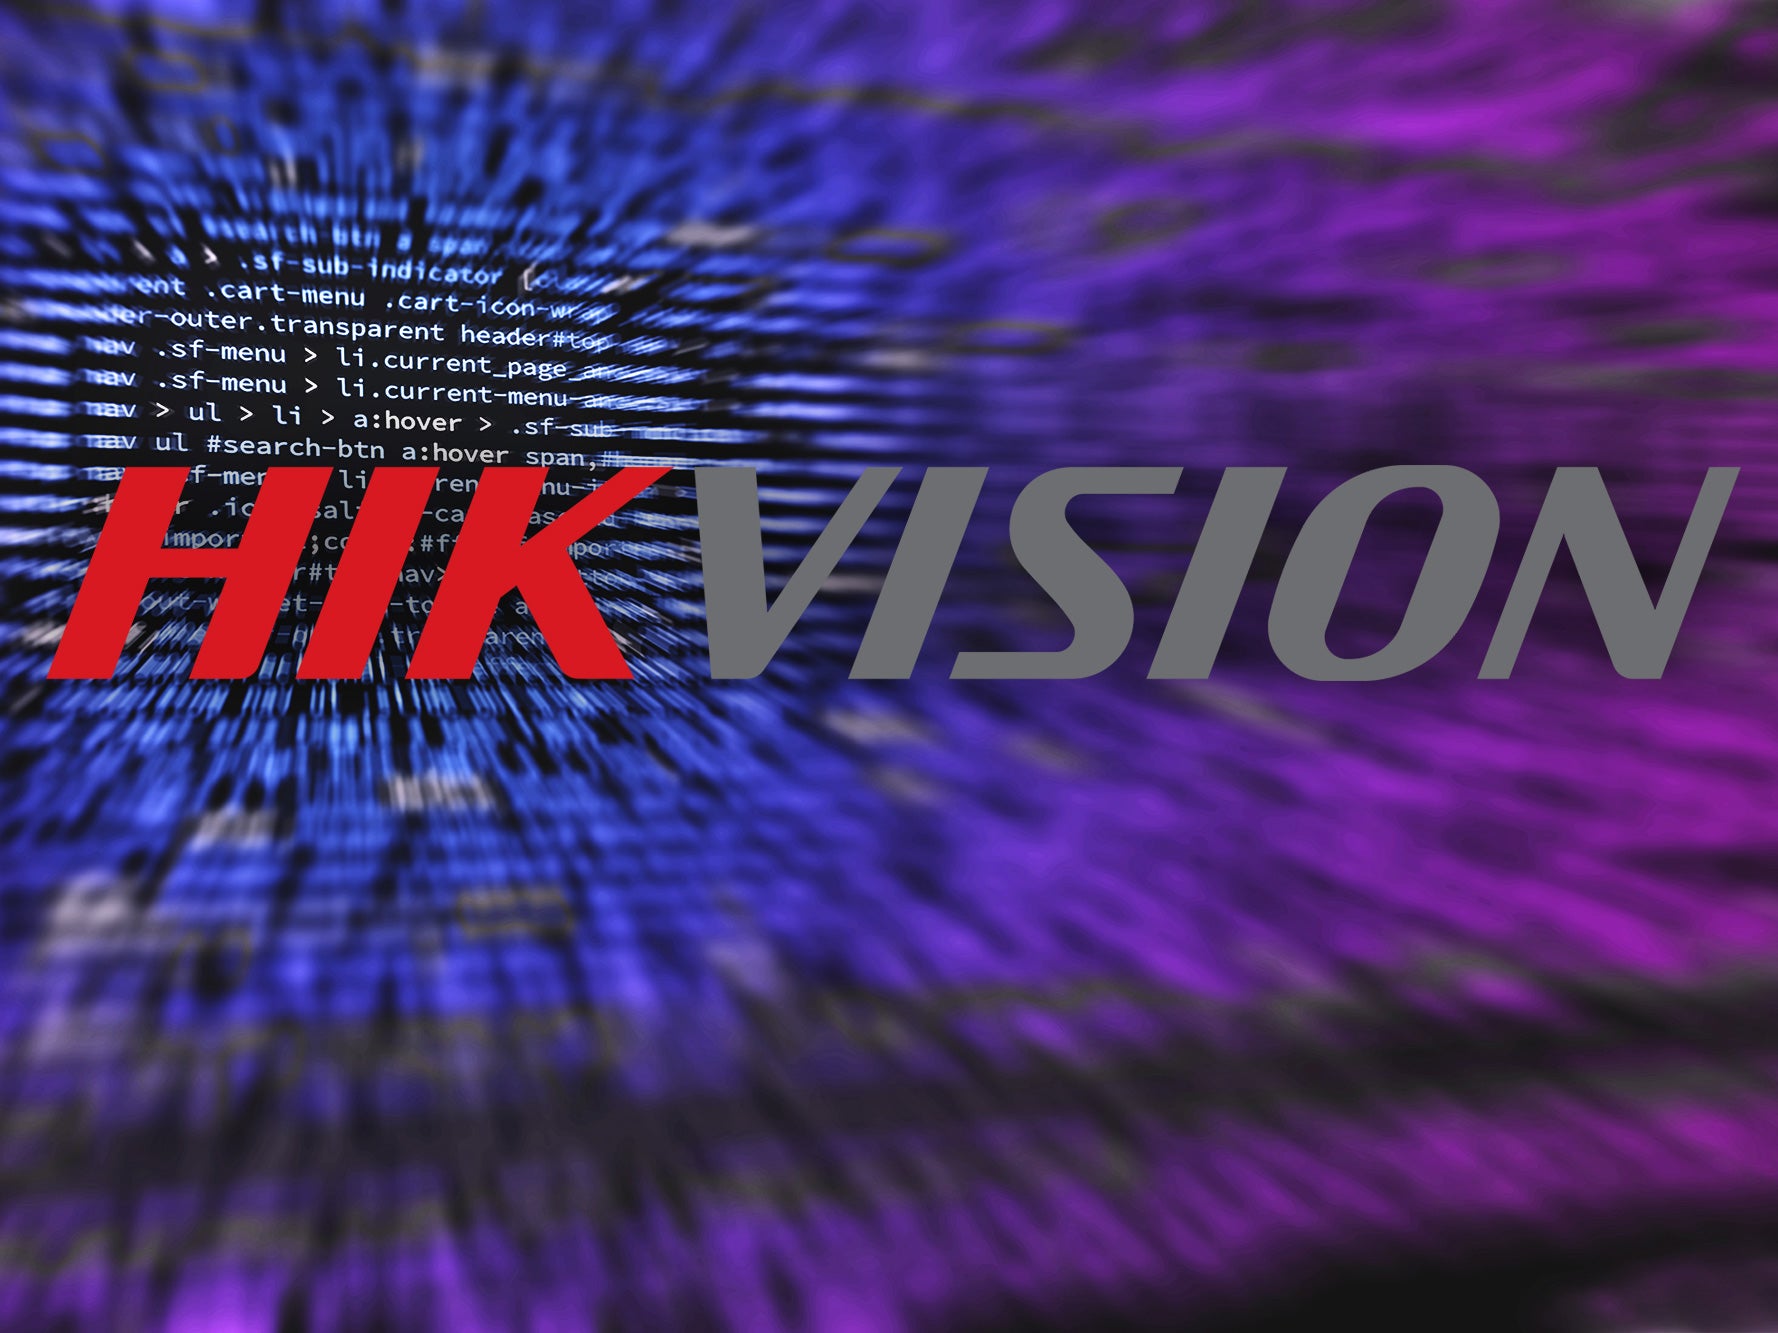 Just how secure are Hikvision cameras?